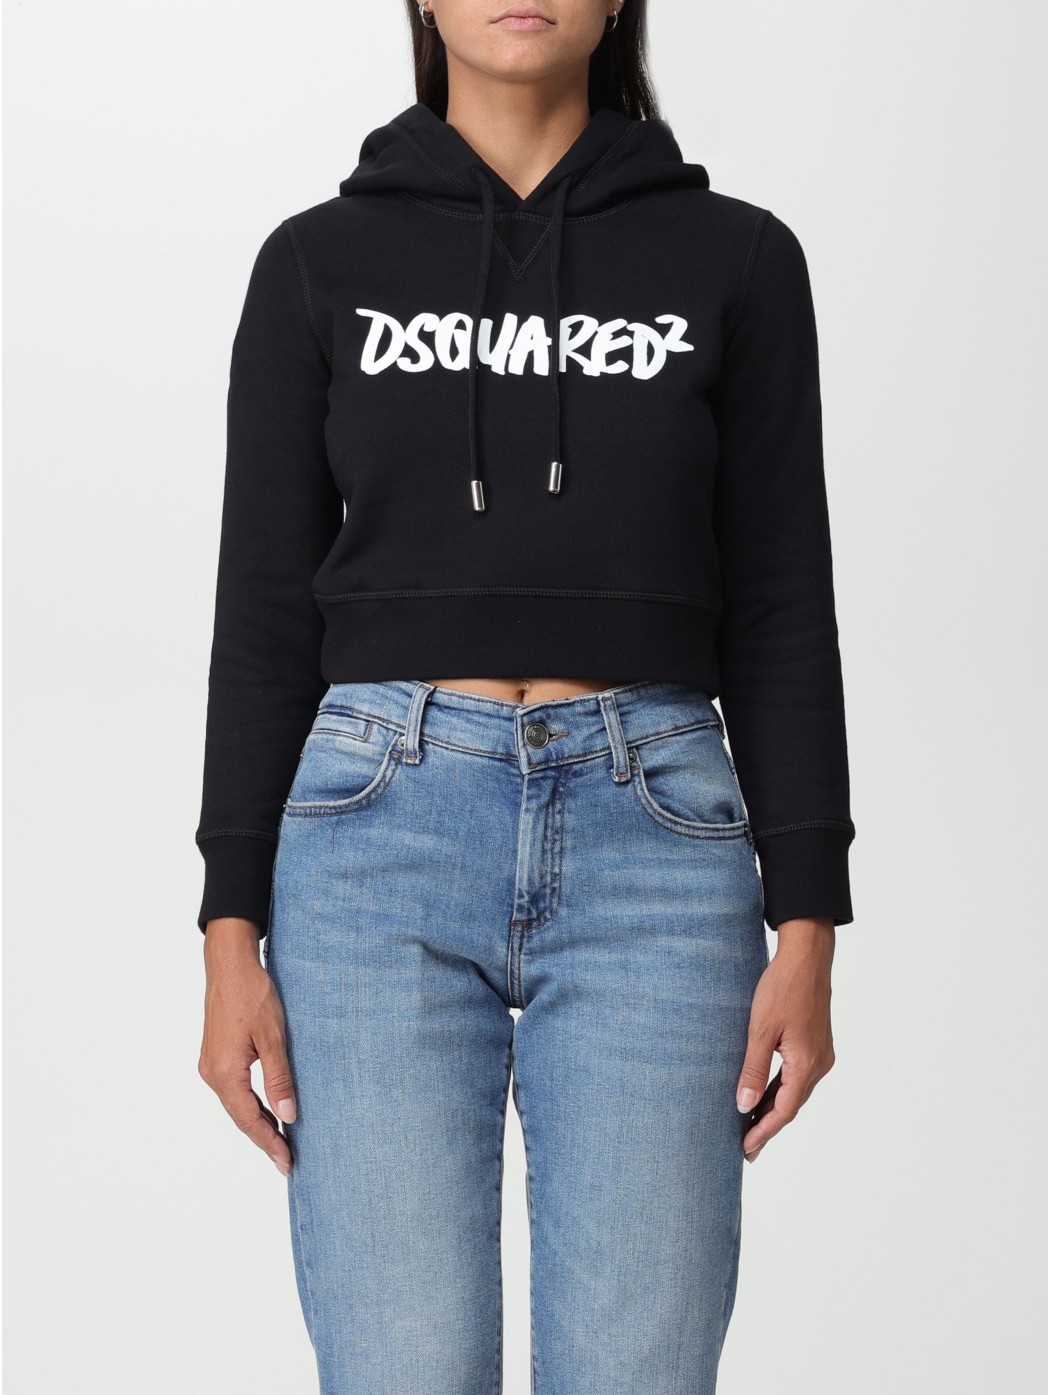 HOODIE DSQUARED2...